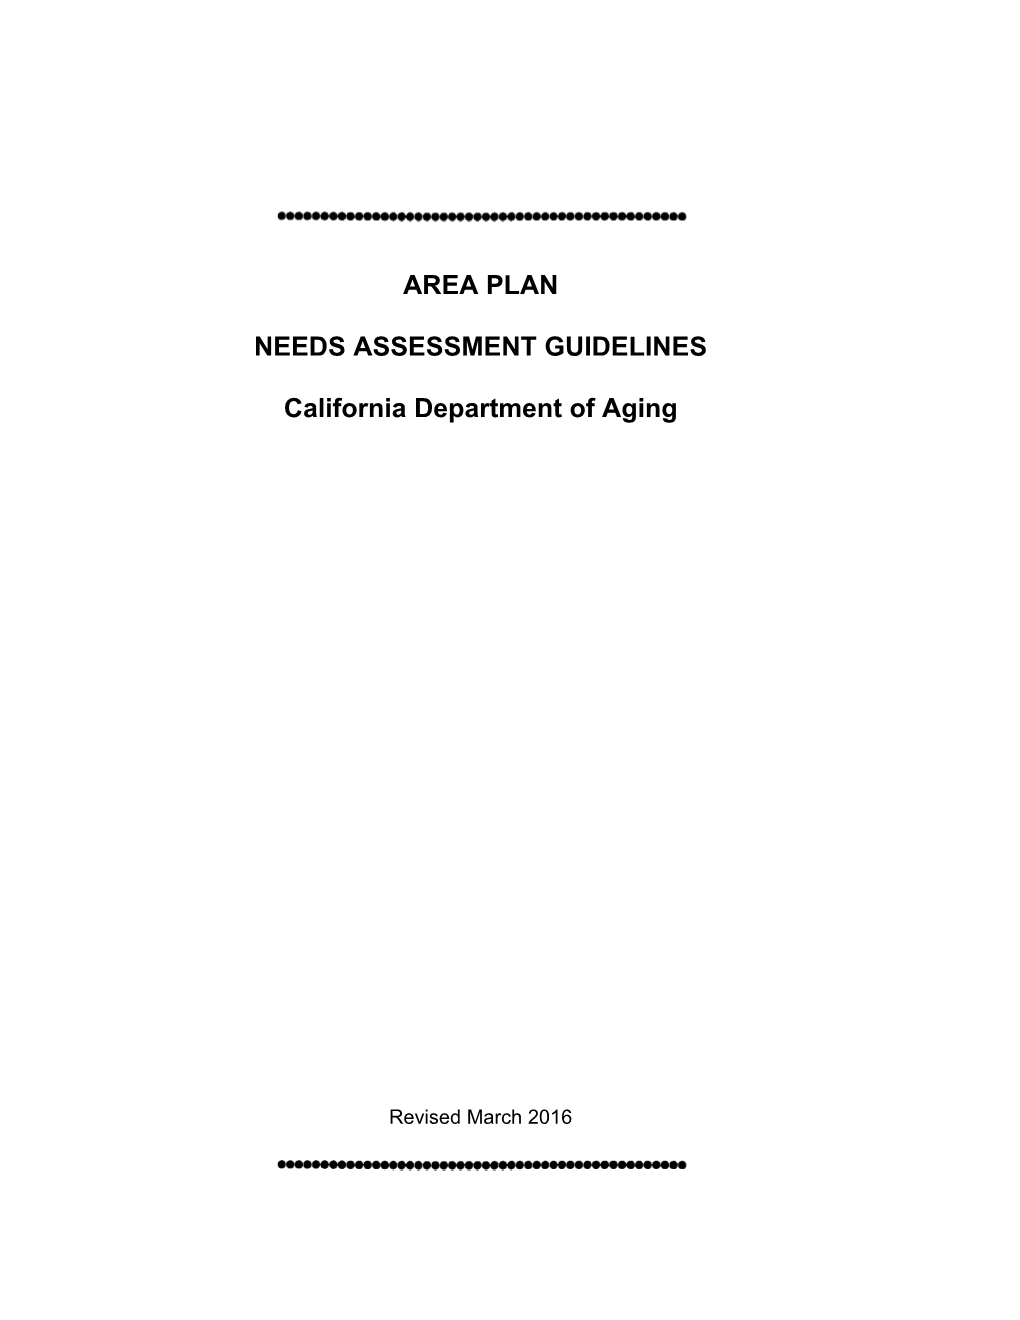 Needs Assessment Guidelines